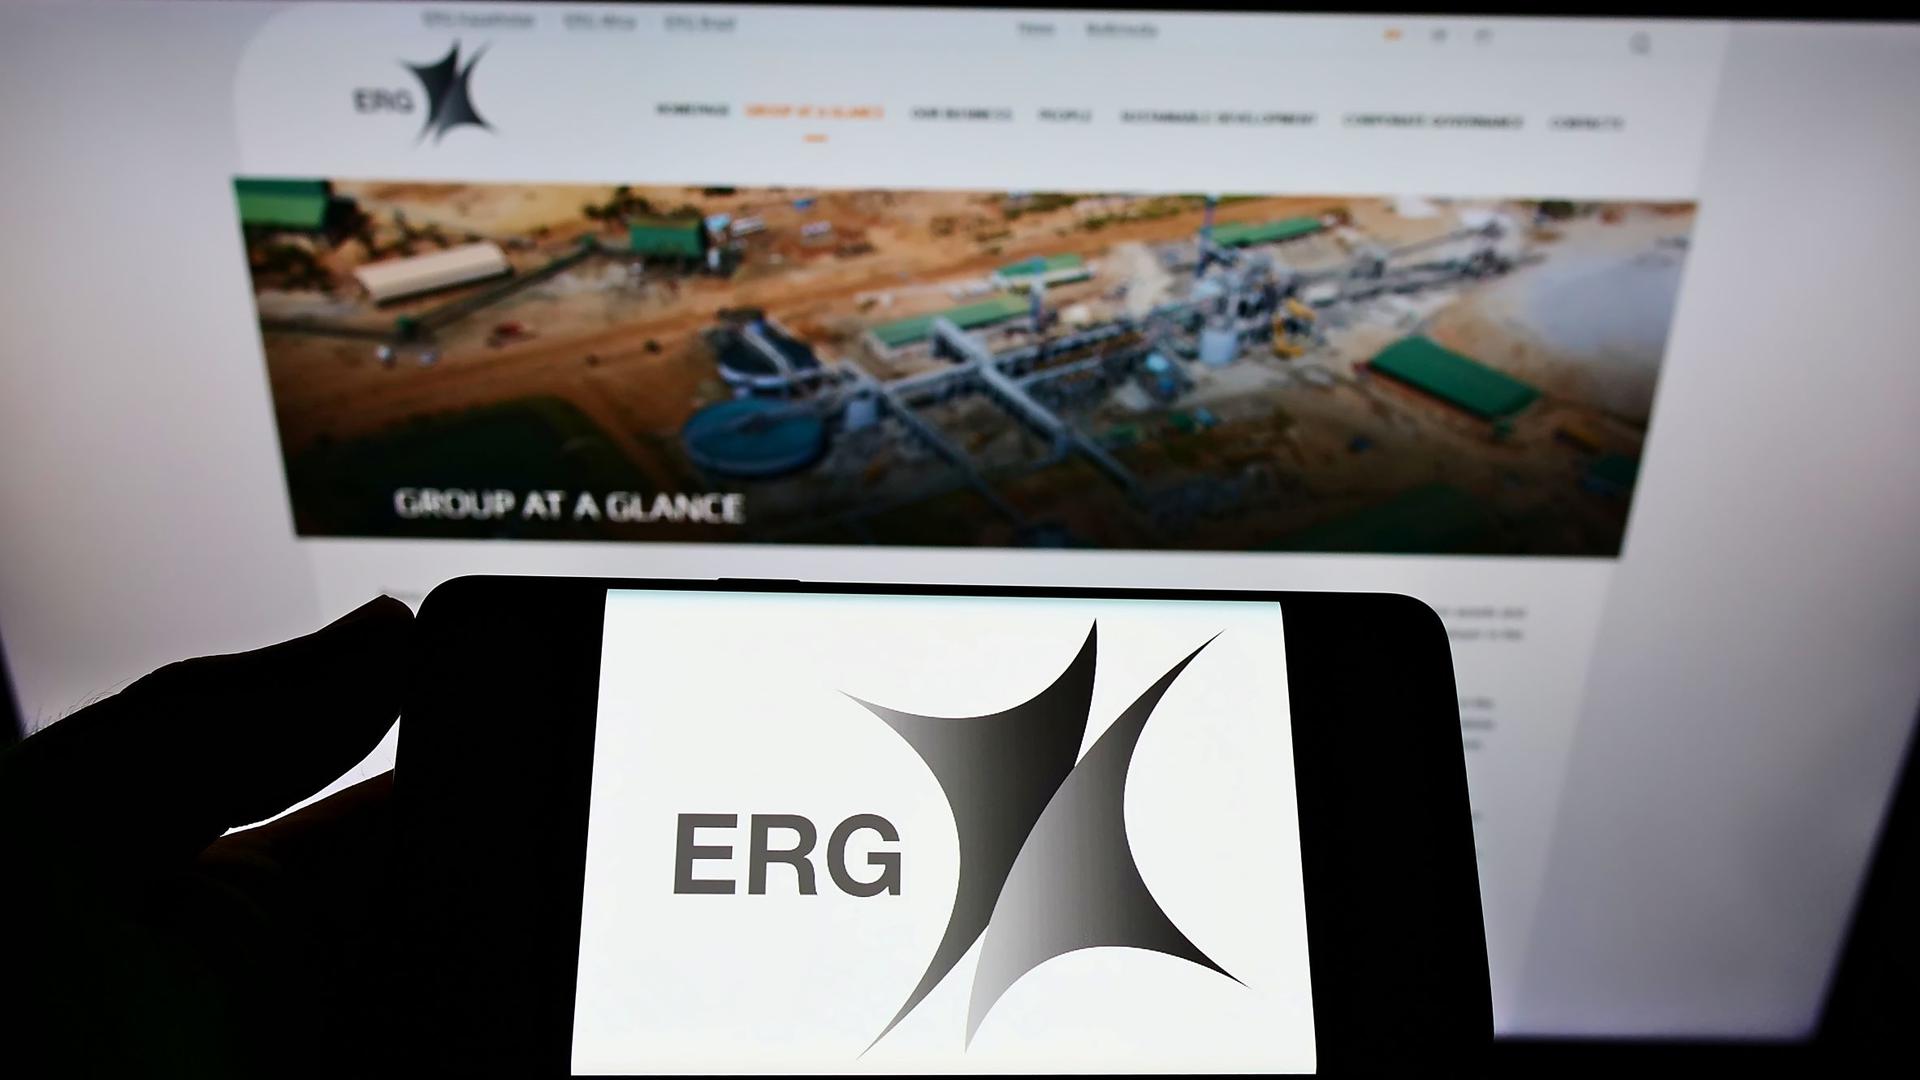 The logo and web site of Eurasian Resources Group, or ERG